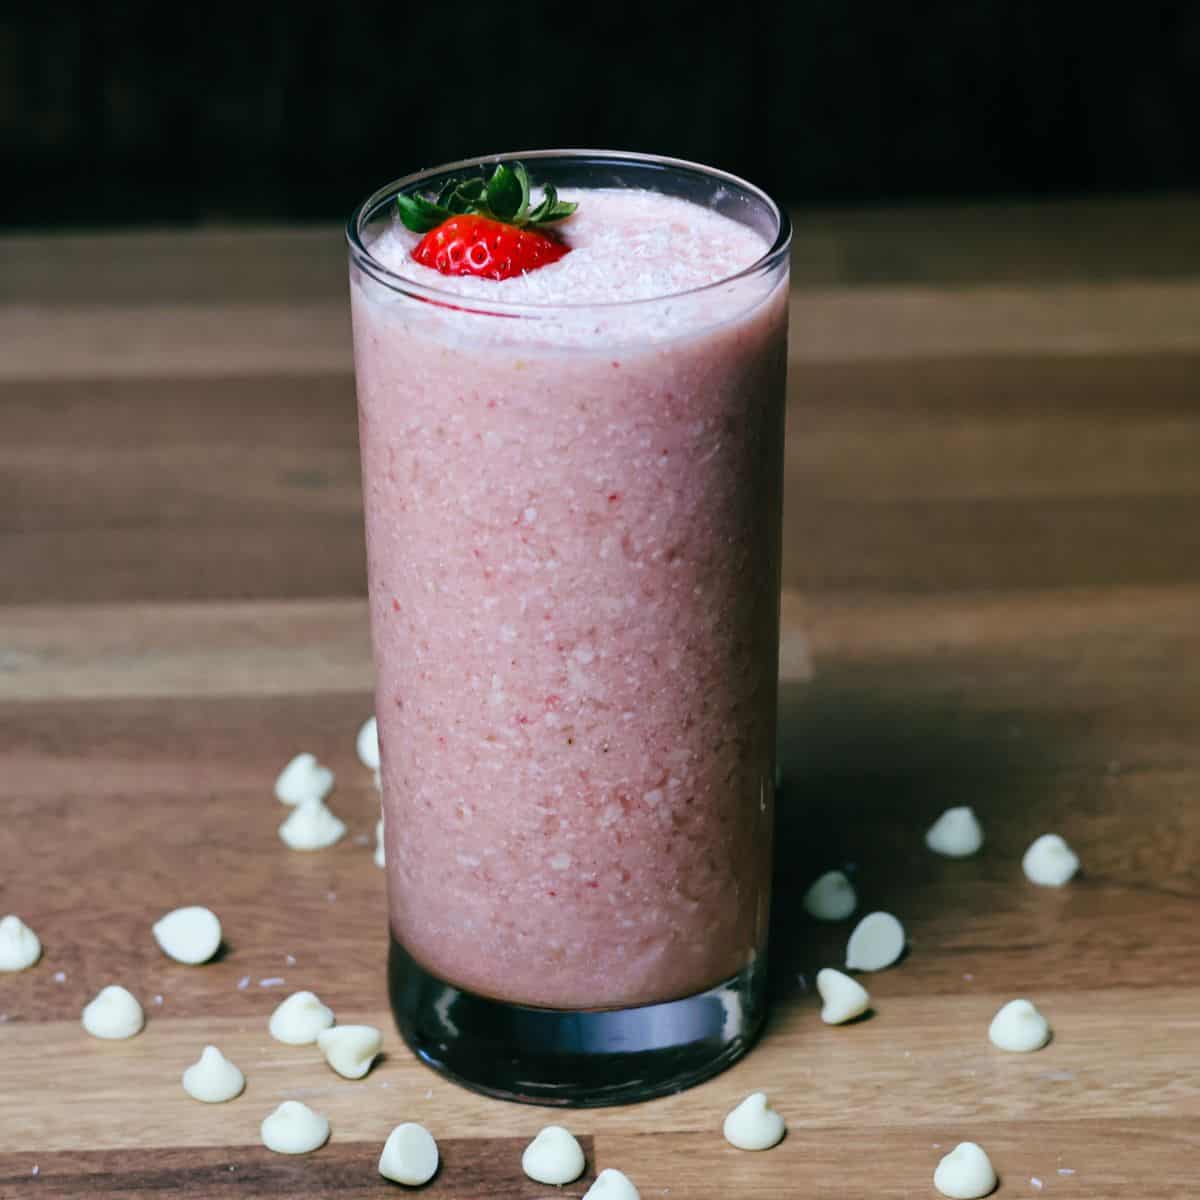 A tall, refreshing glass of pink Bahama Mama smoothie garnished with a strawberry, with white chocolate chips scattered on the wooden surface.